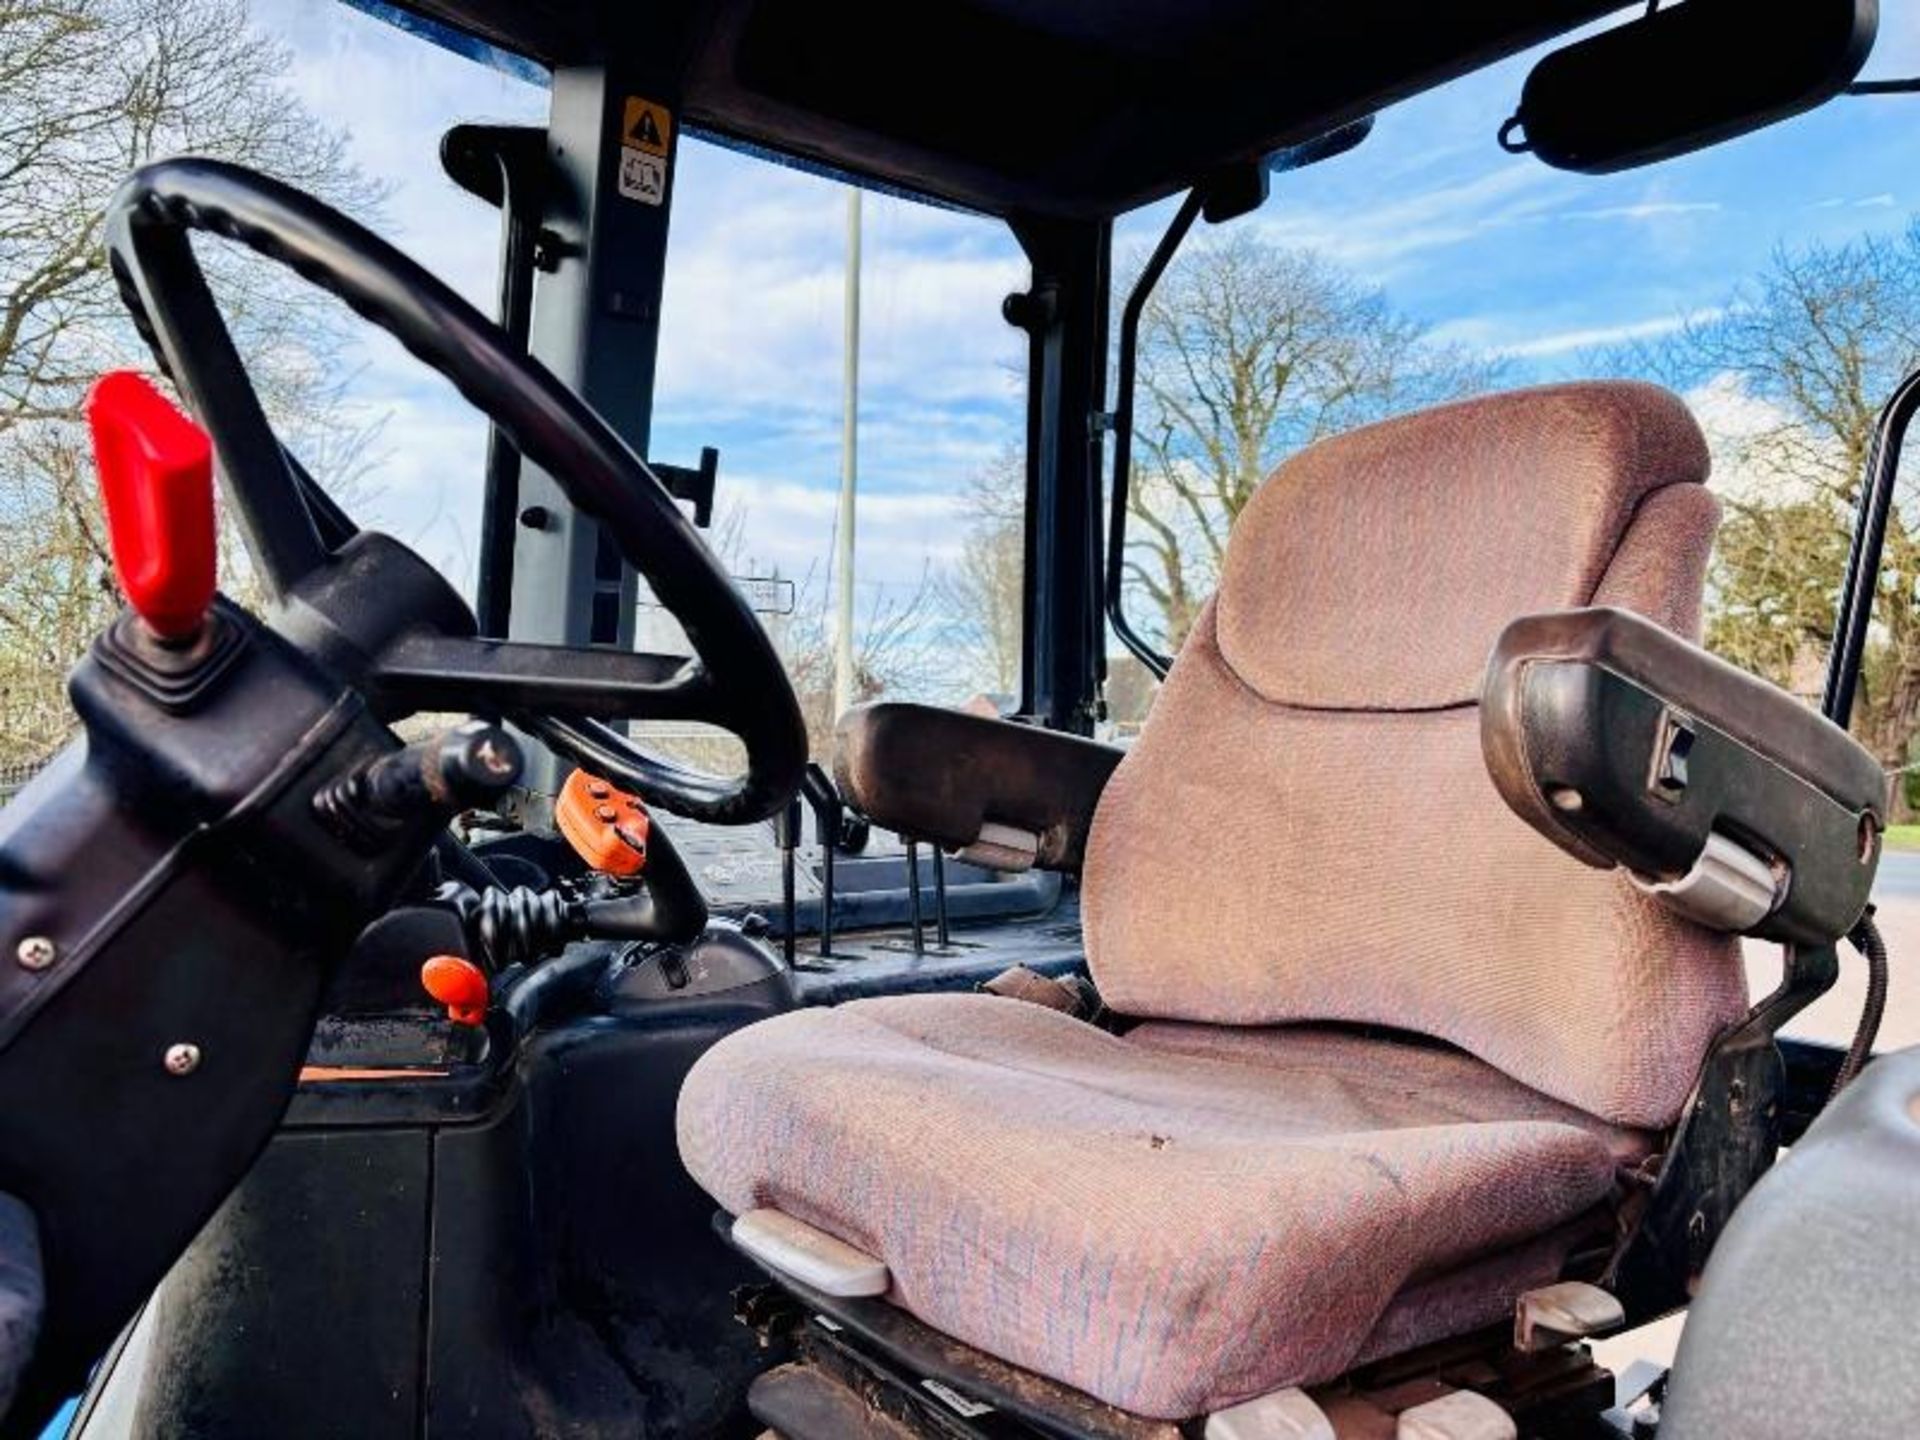 NEW HOLLAND TM155 4WD TRACTOR *5619 HOURS* C/W RANGE COMMAND GEAR BOX - Image 8 of 19